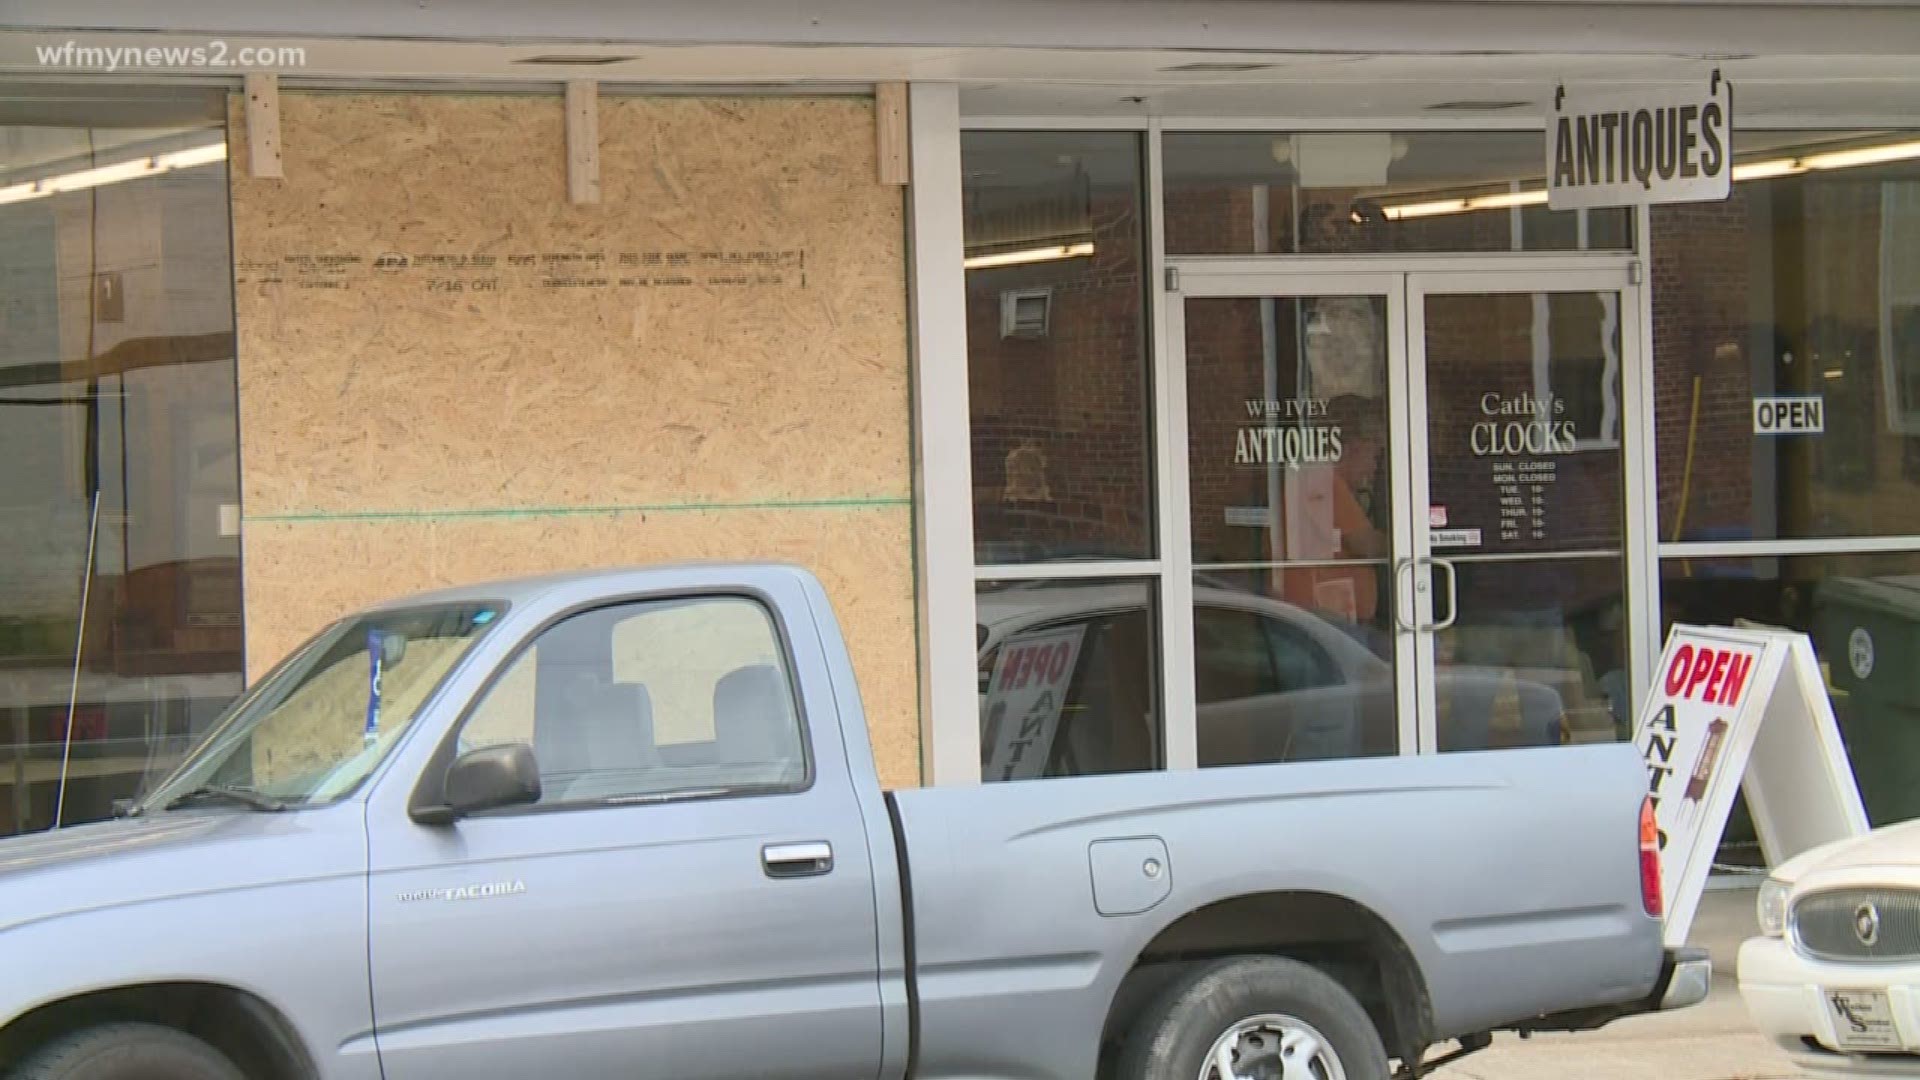 A deer crashes into an antique store in Asheboro causing some damage to some pottery.